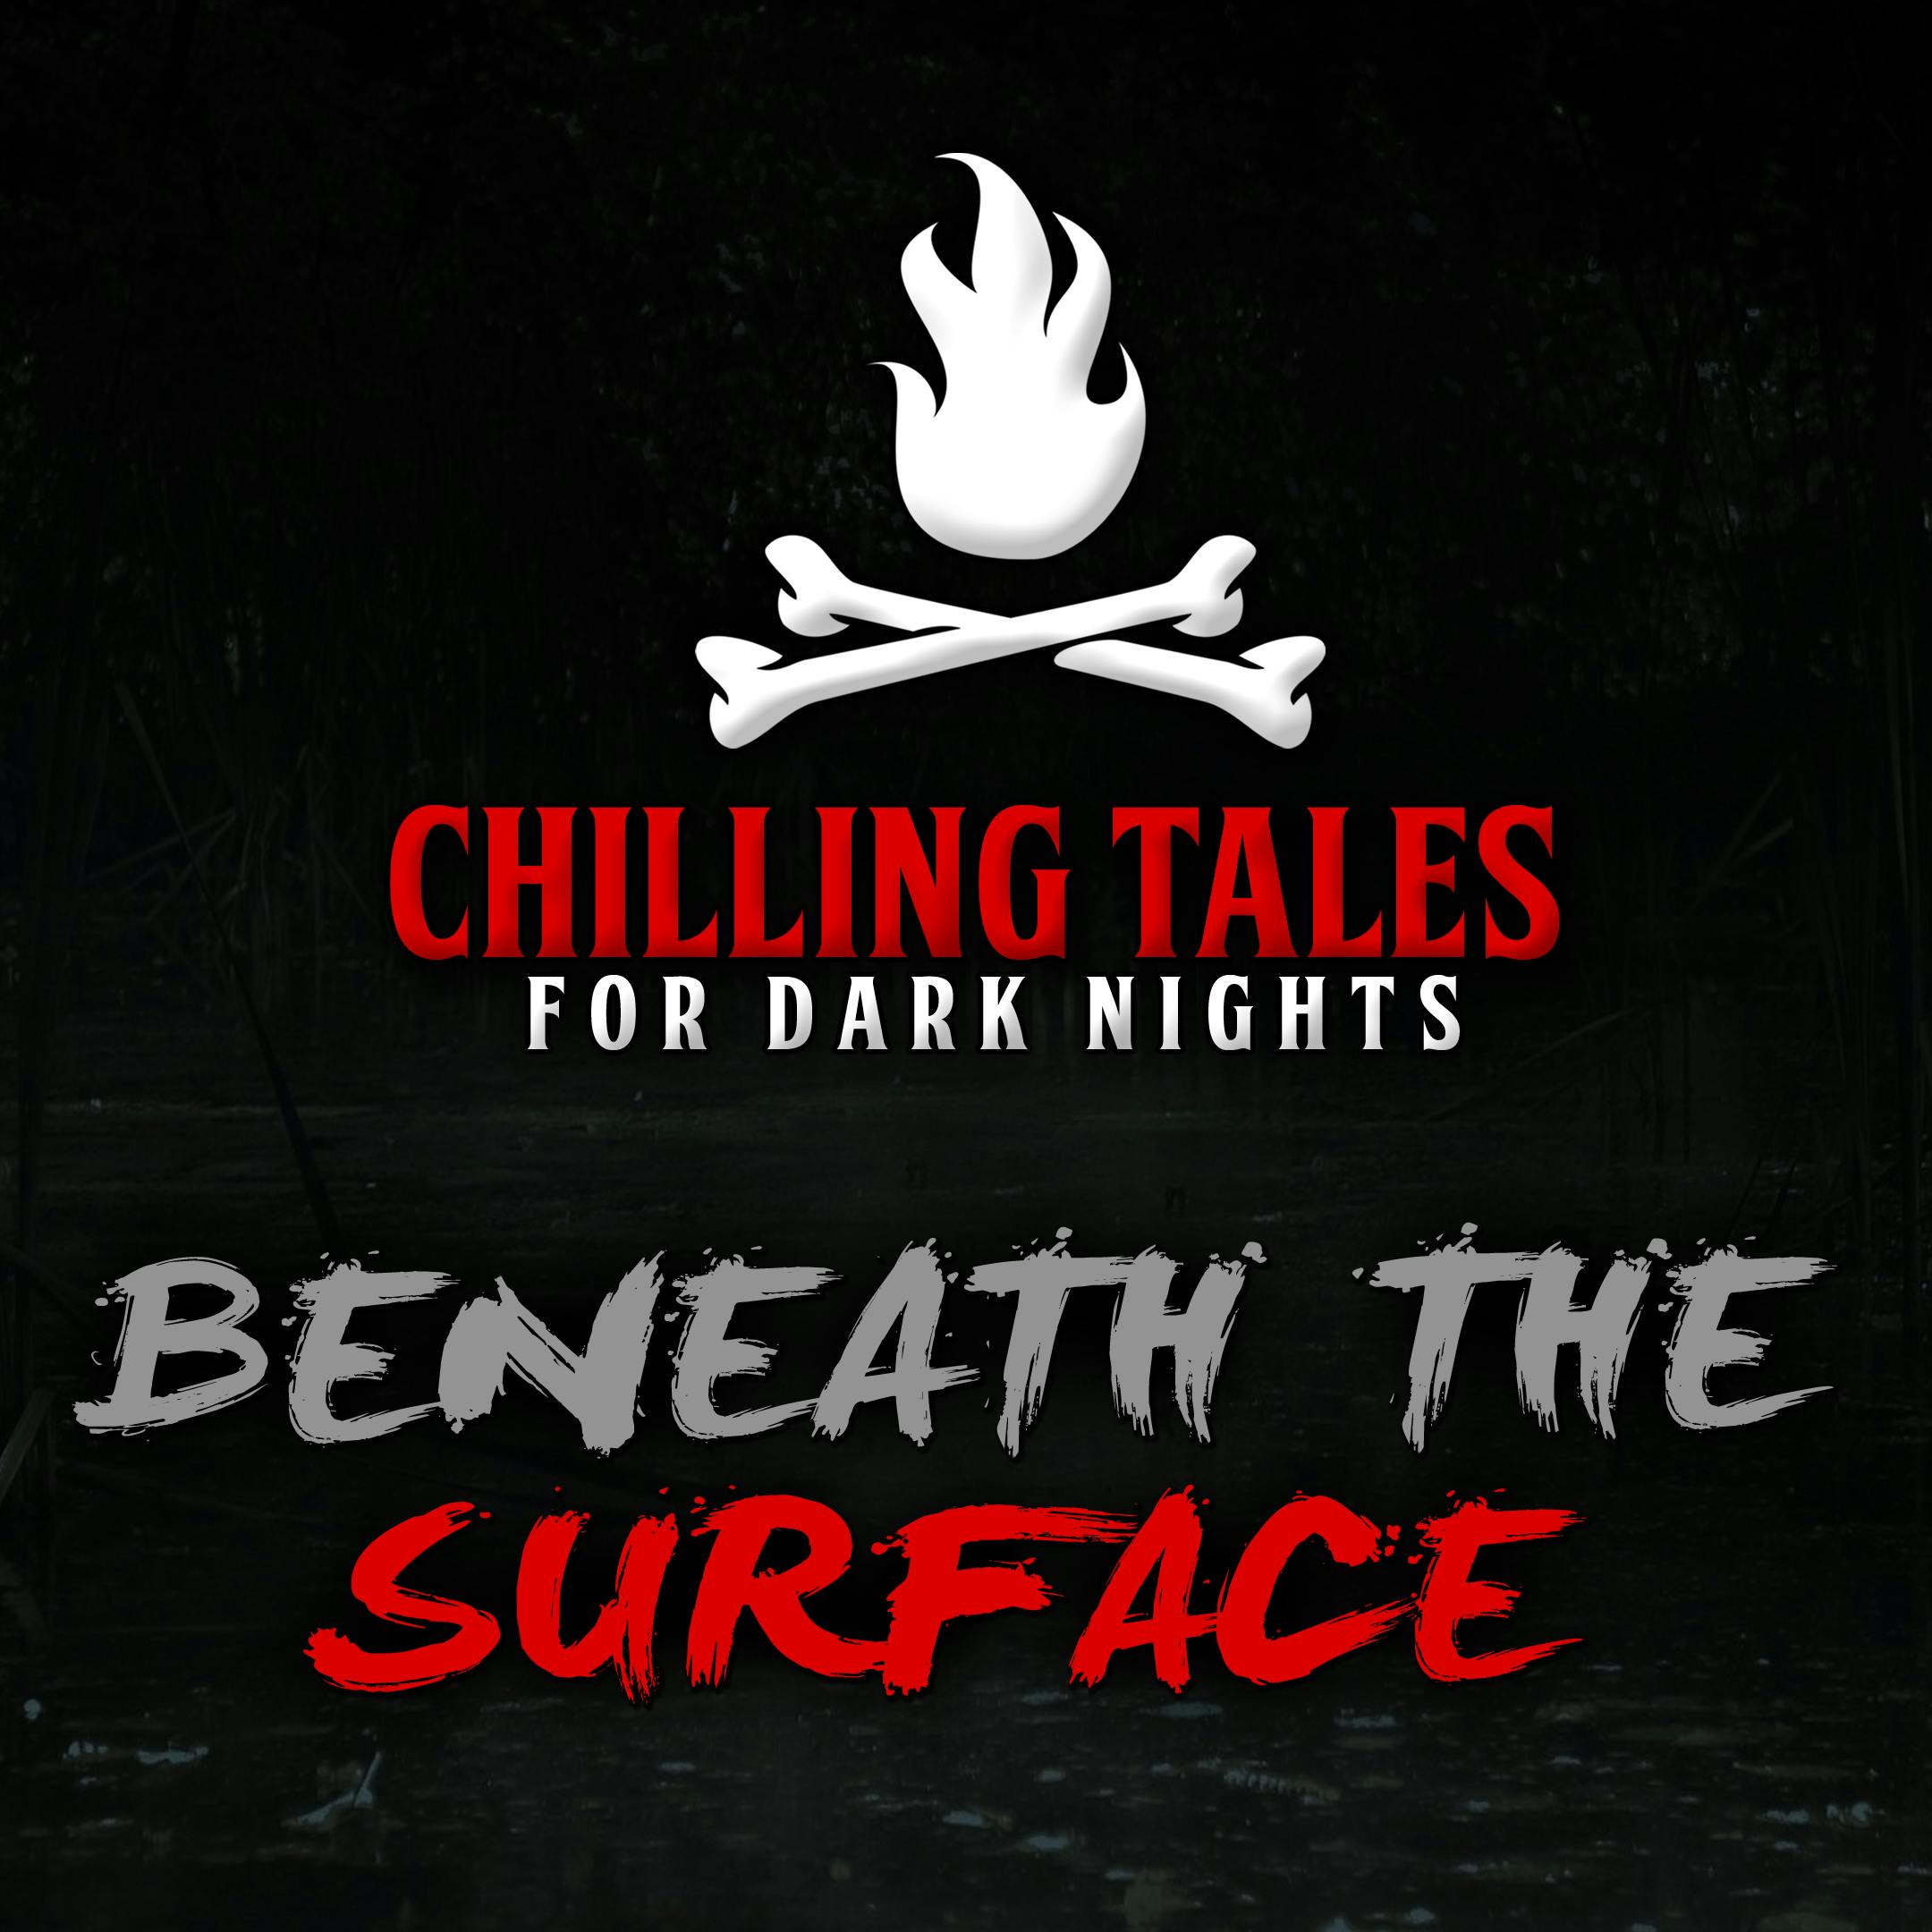 63: Beneath the Surface – Chilling Tales for Dark Nights